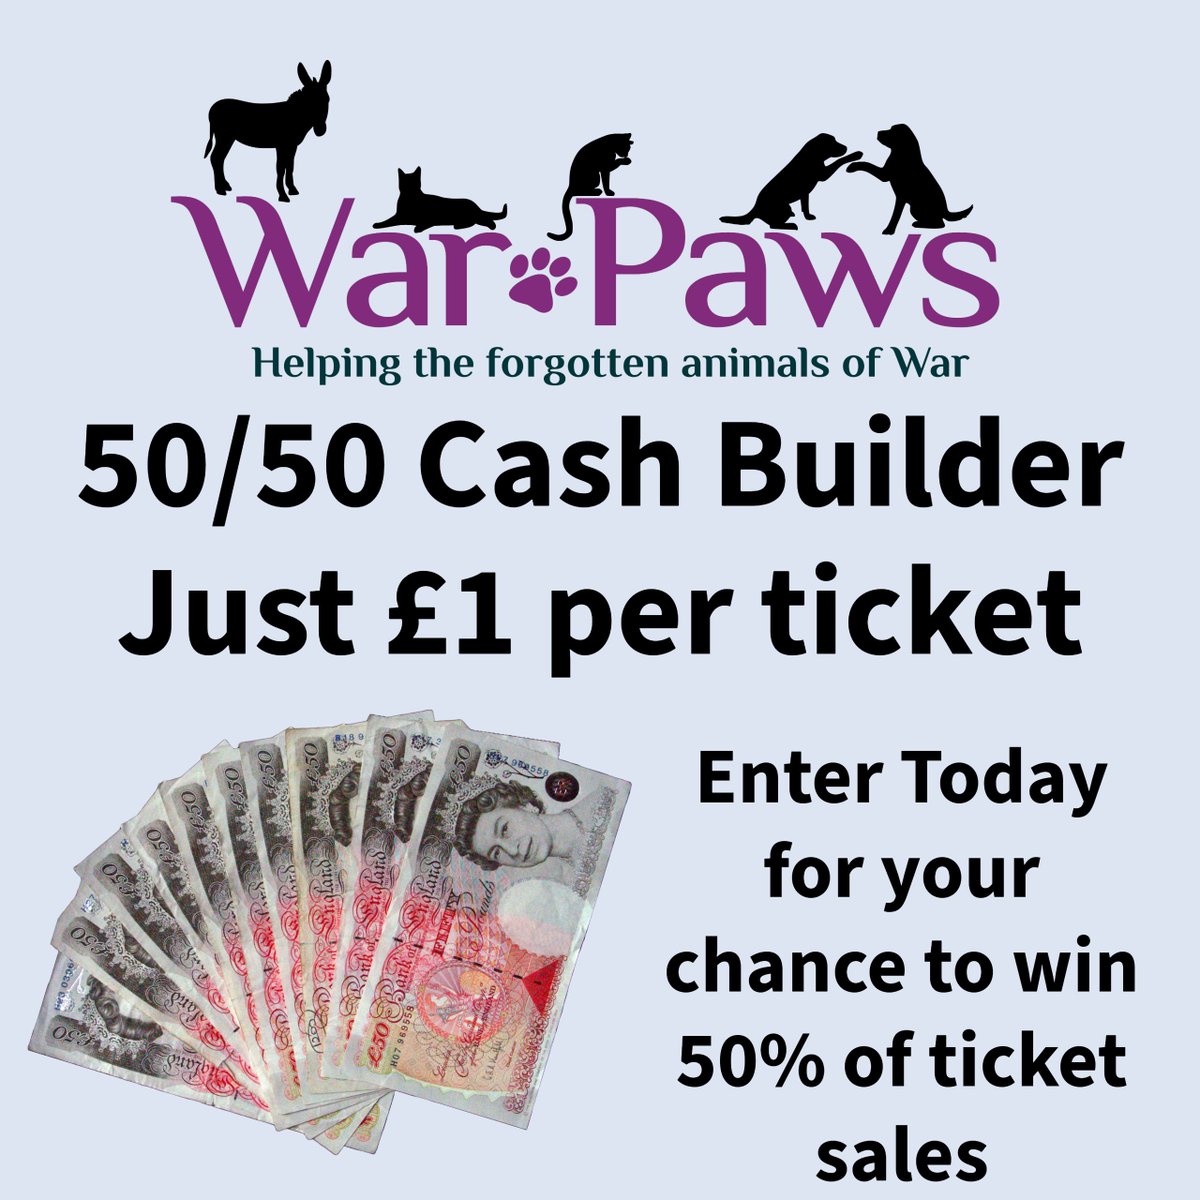 January is a bad month for charities & we need to step up our game to raise the funds to feed our dogs so we have set up this 50/50 Cash Builder to raise funds. Tickets cost just £1 and on 31 Jan 24 ONE lucky winner will win 50% of ticket sales. raffall.com/351027/enter-r…